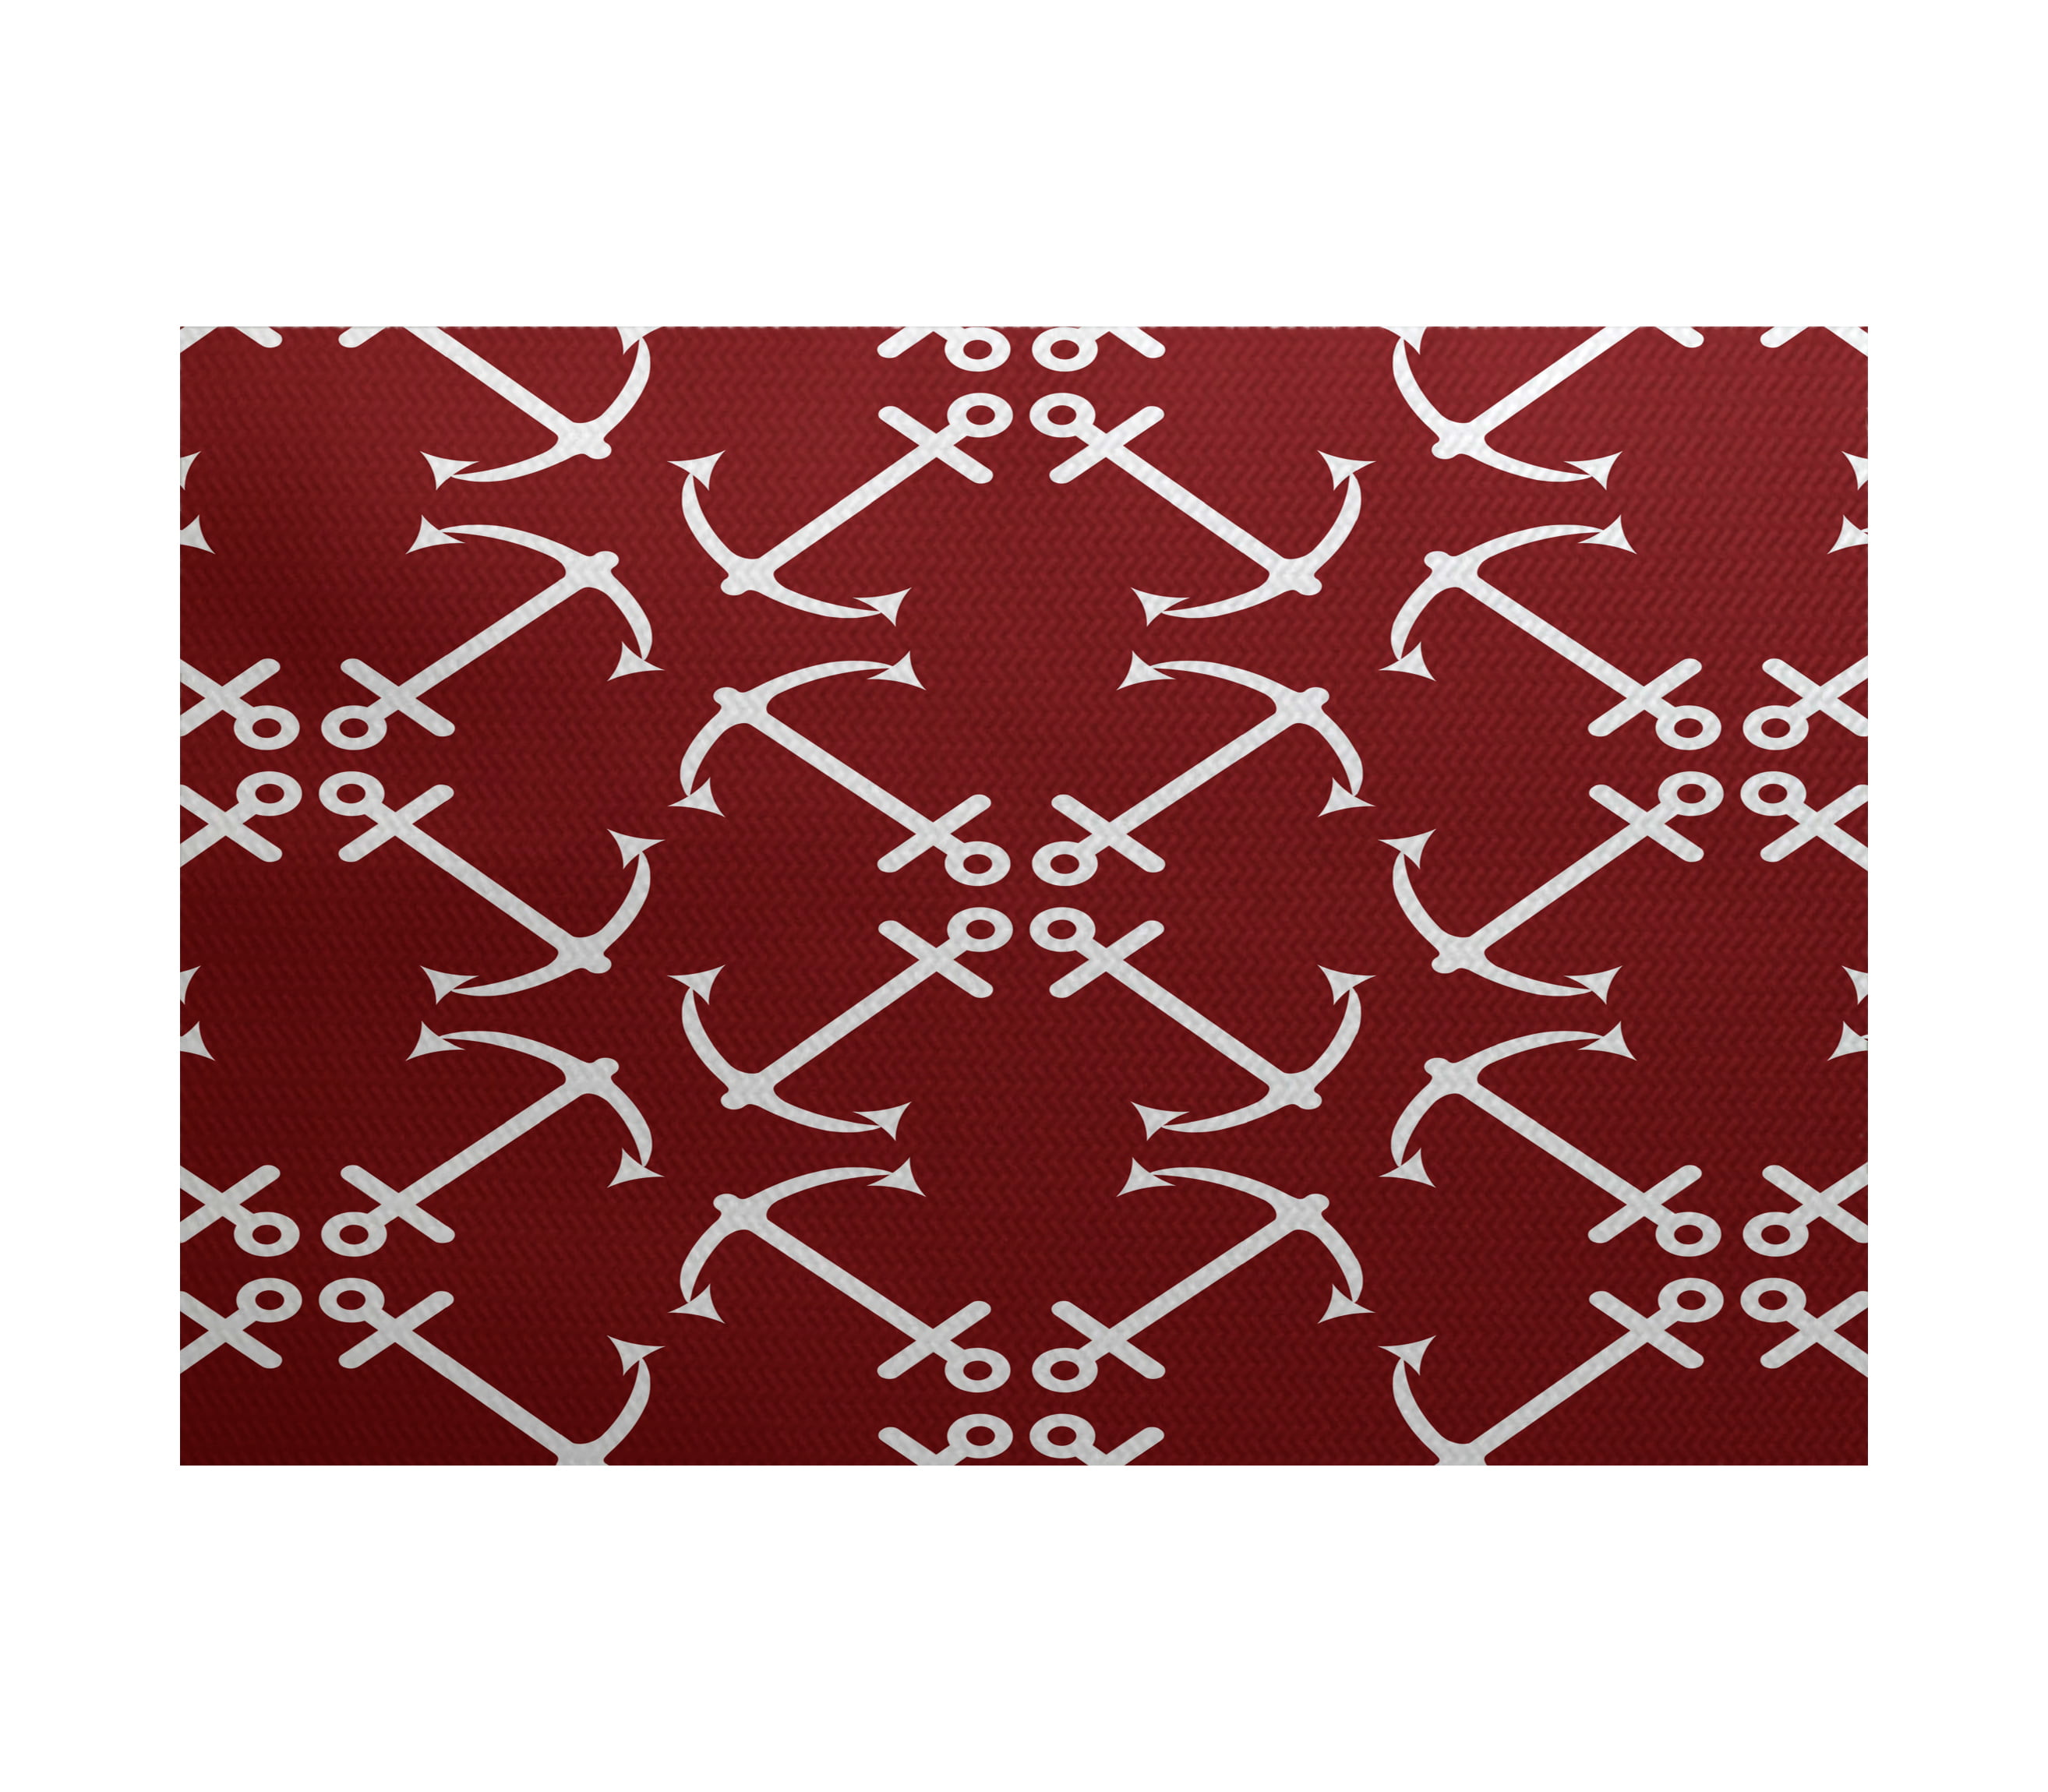 E by design RGN445RE1-23 Anchors Up Geometric Print Indoor/Outdoor Rug 2 x 3 Red 